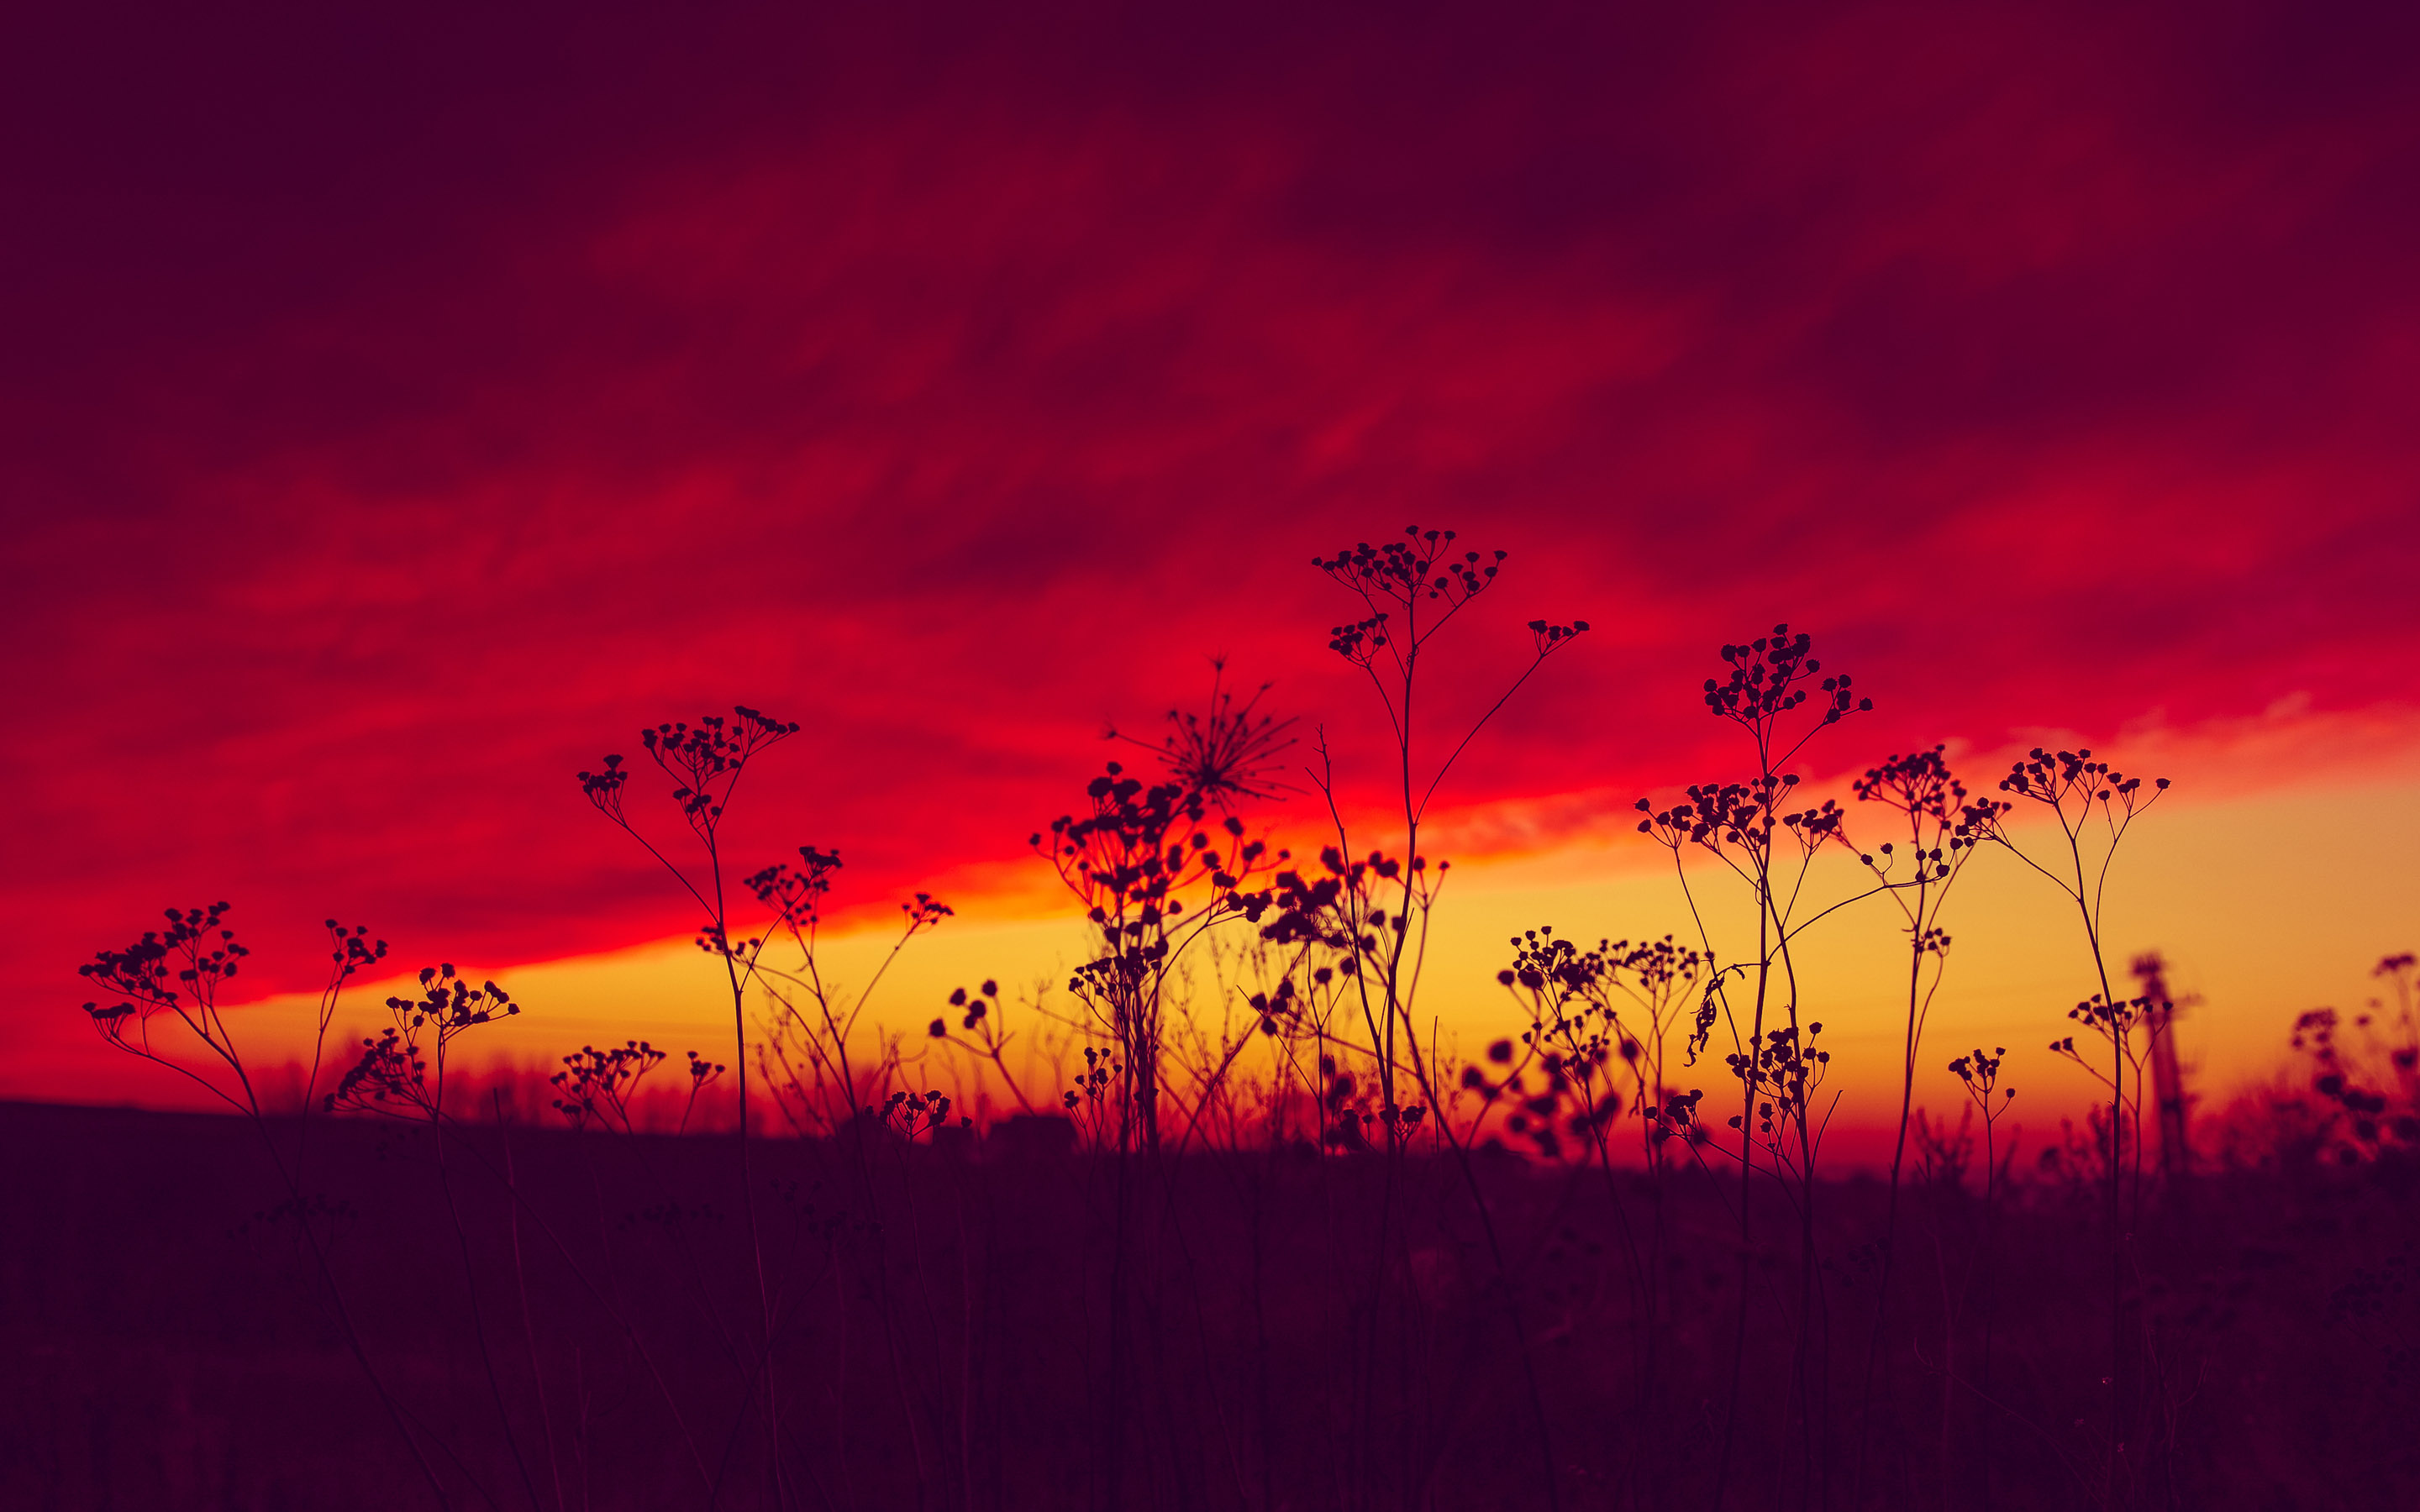 Nature Sunset twilight grass red sky HD 4k Wallpapers : Wallpapers13.com